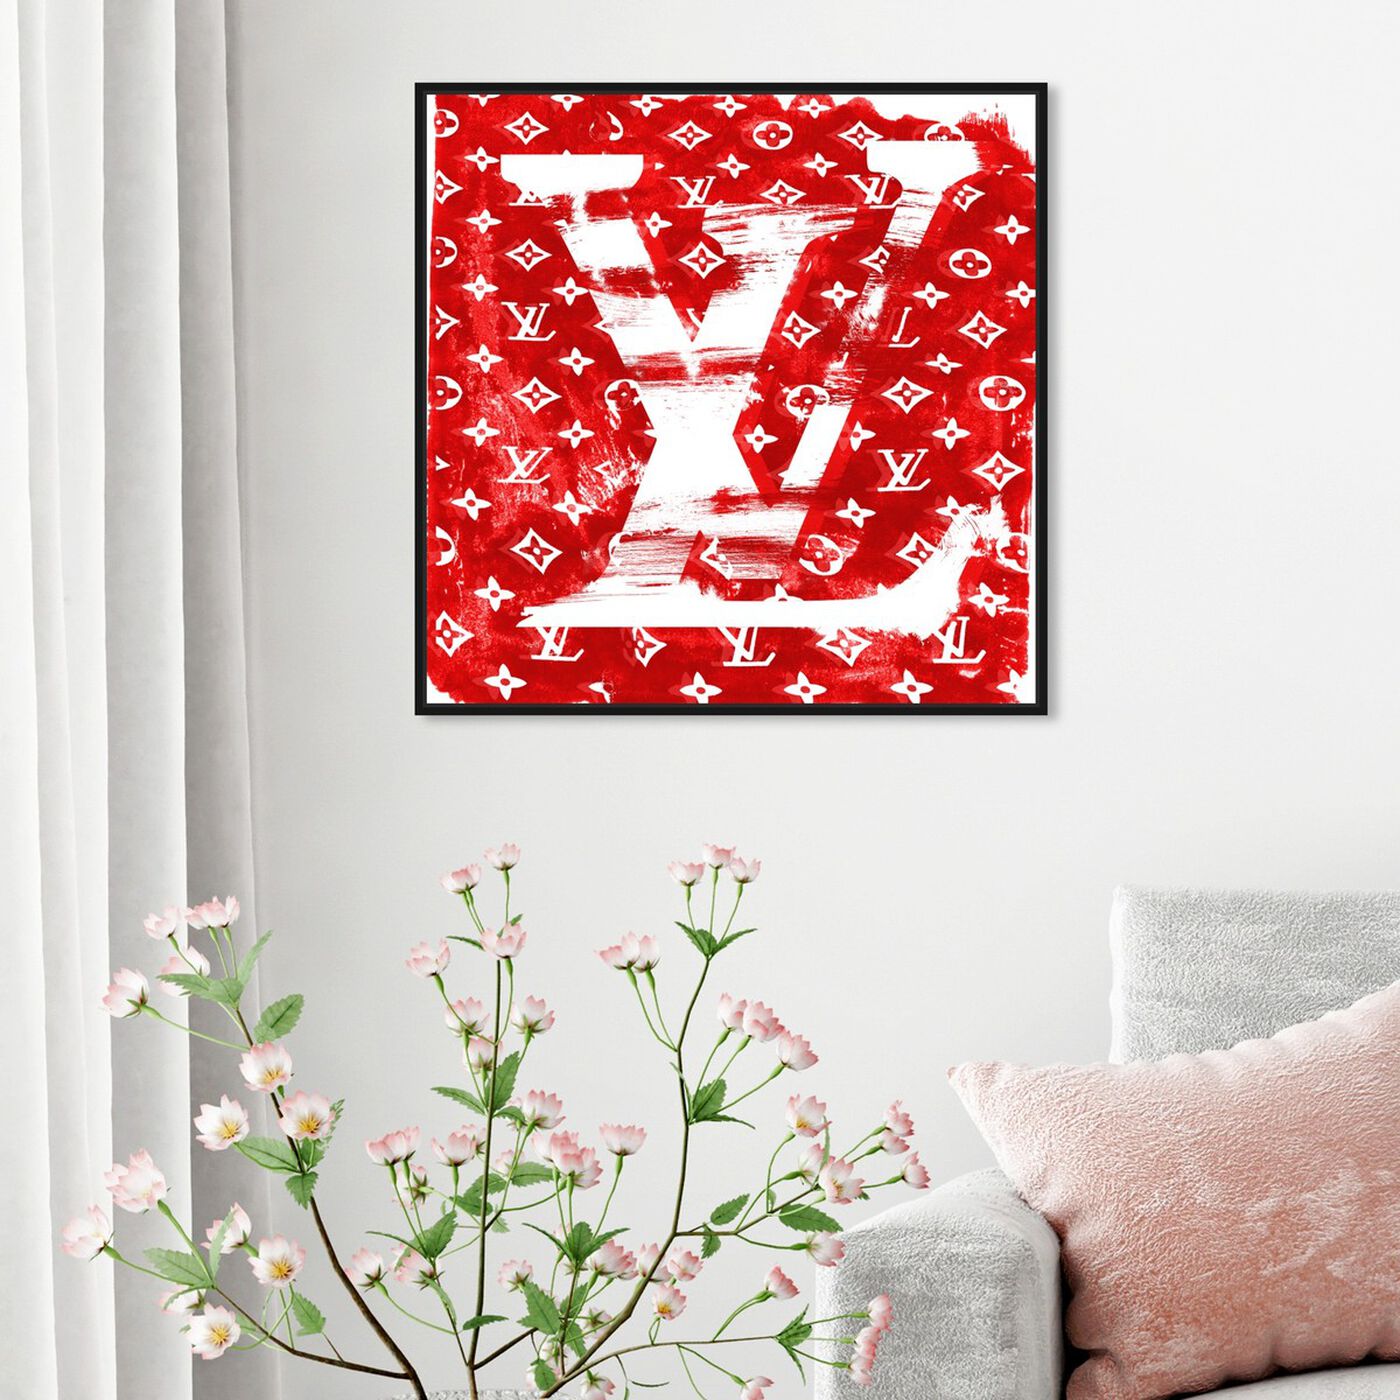 Hanging view of Red Tag featuring fashion and glam and road signs art.